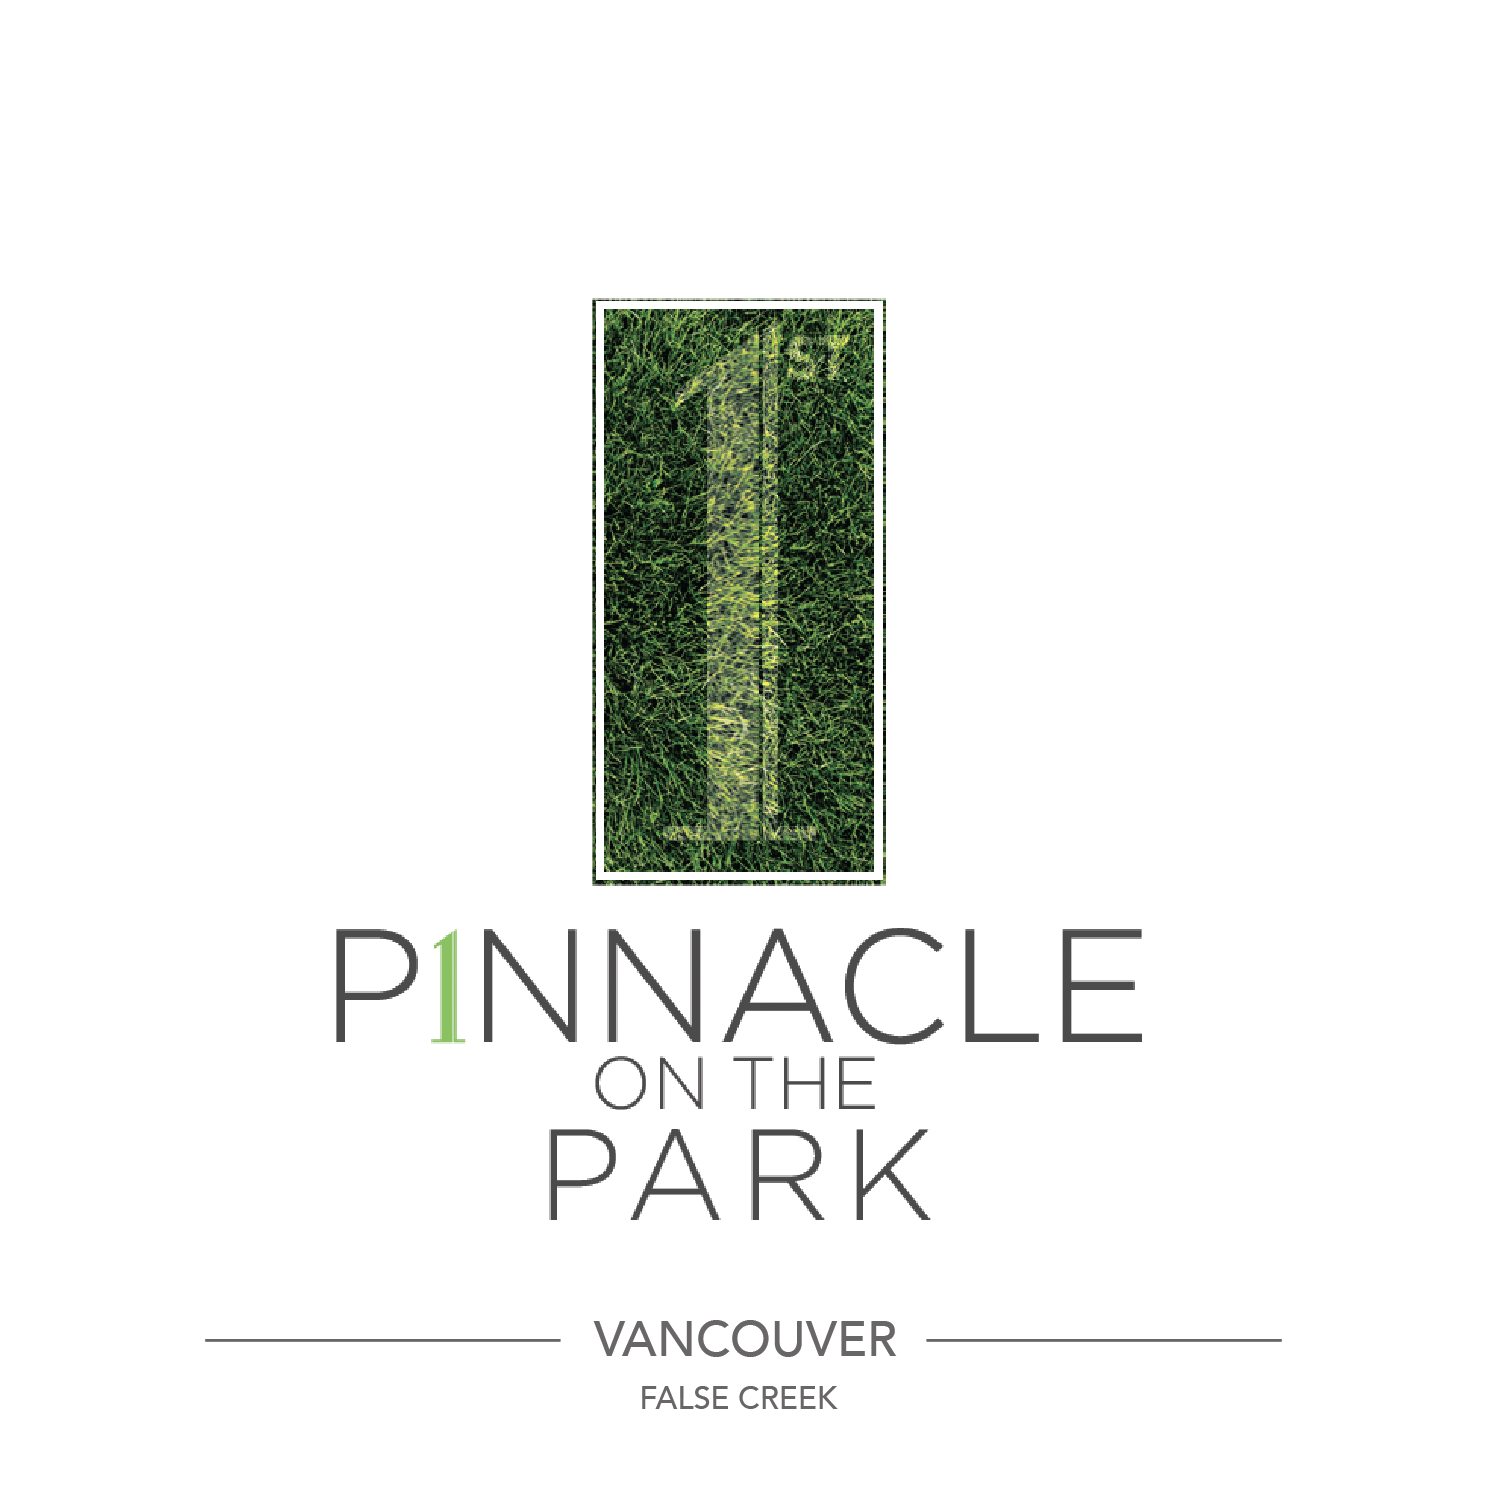 I have sold a property at 803 1708 Ontario ST in Vancouver
